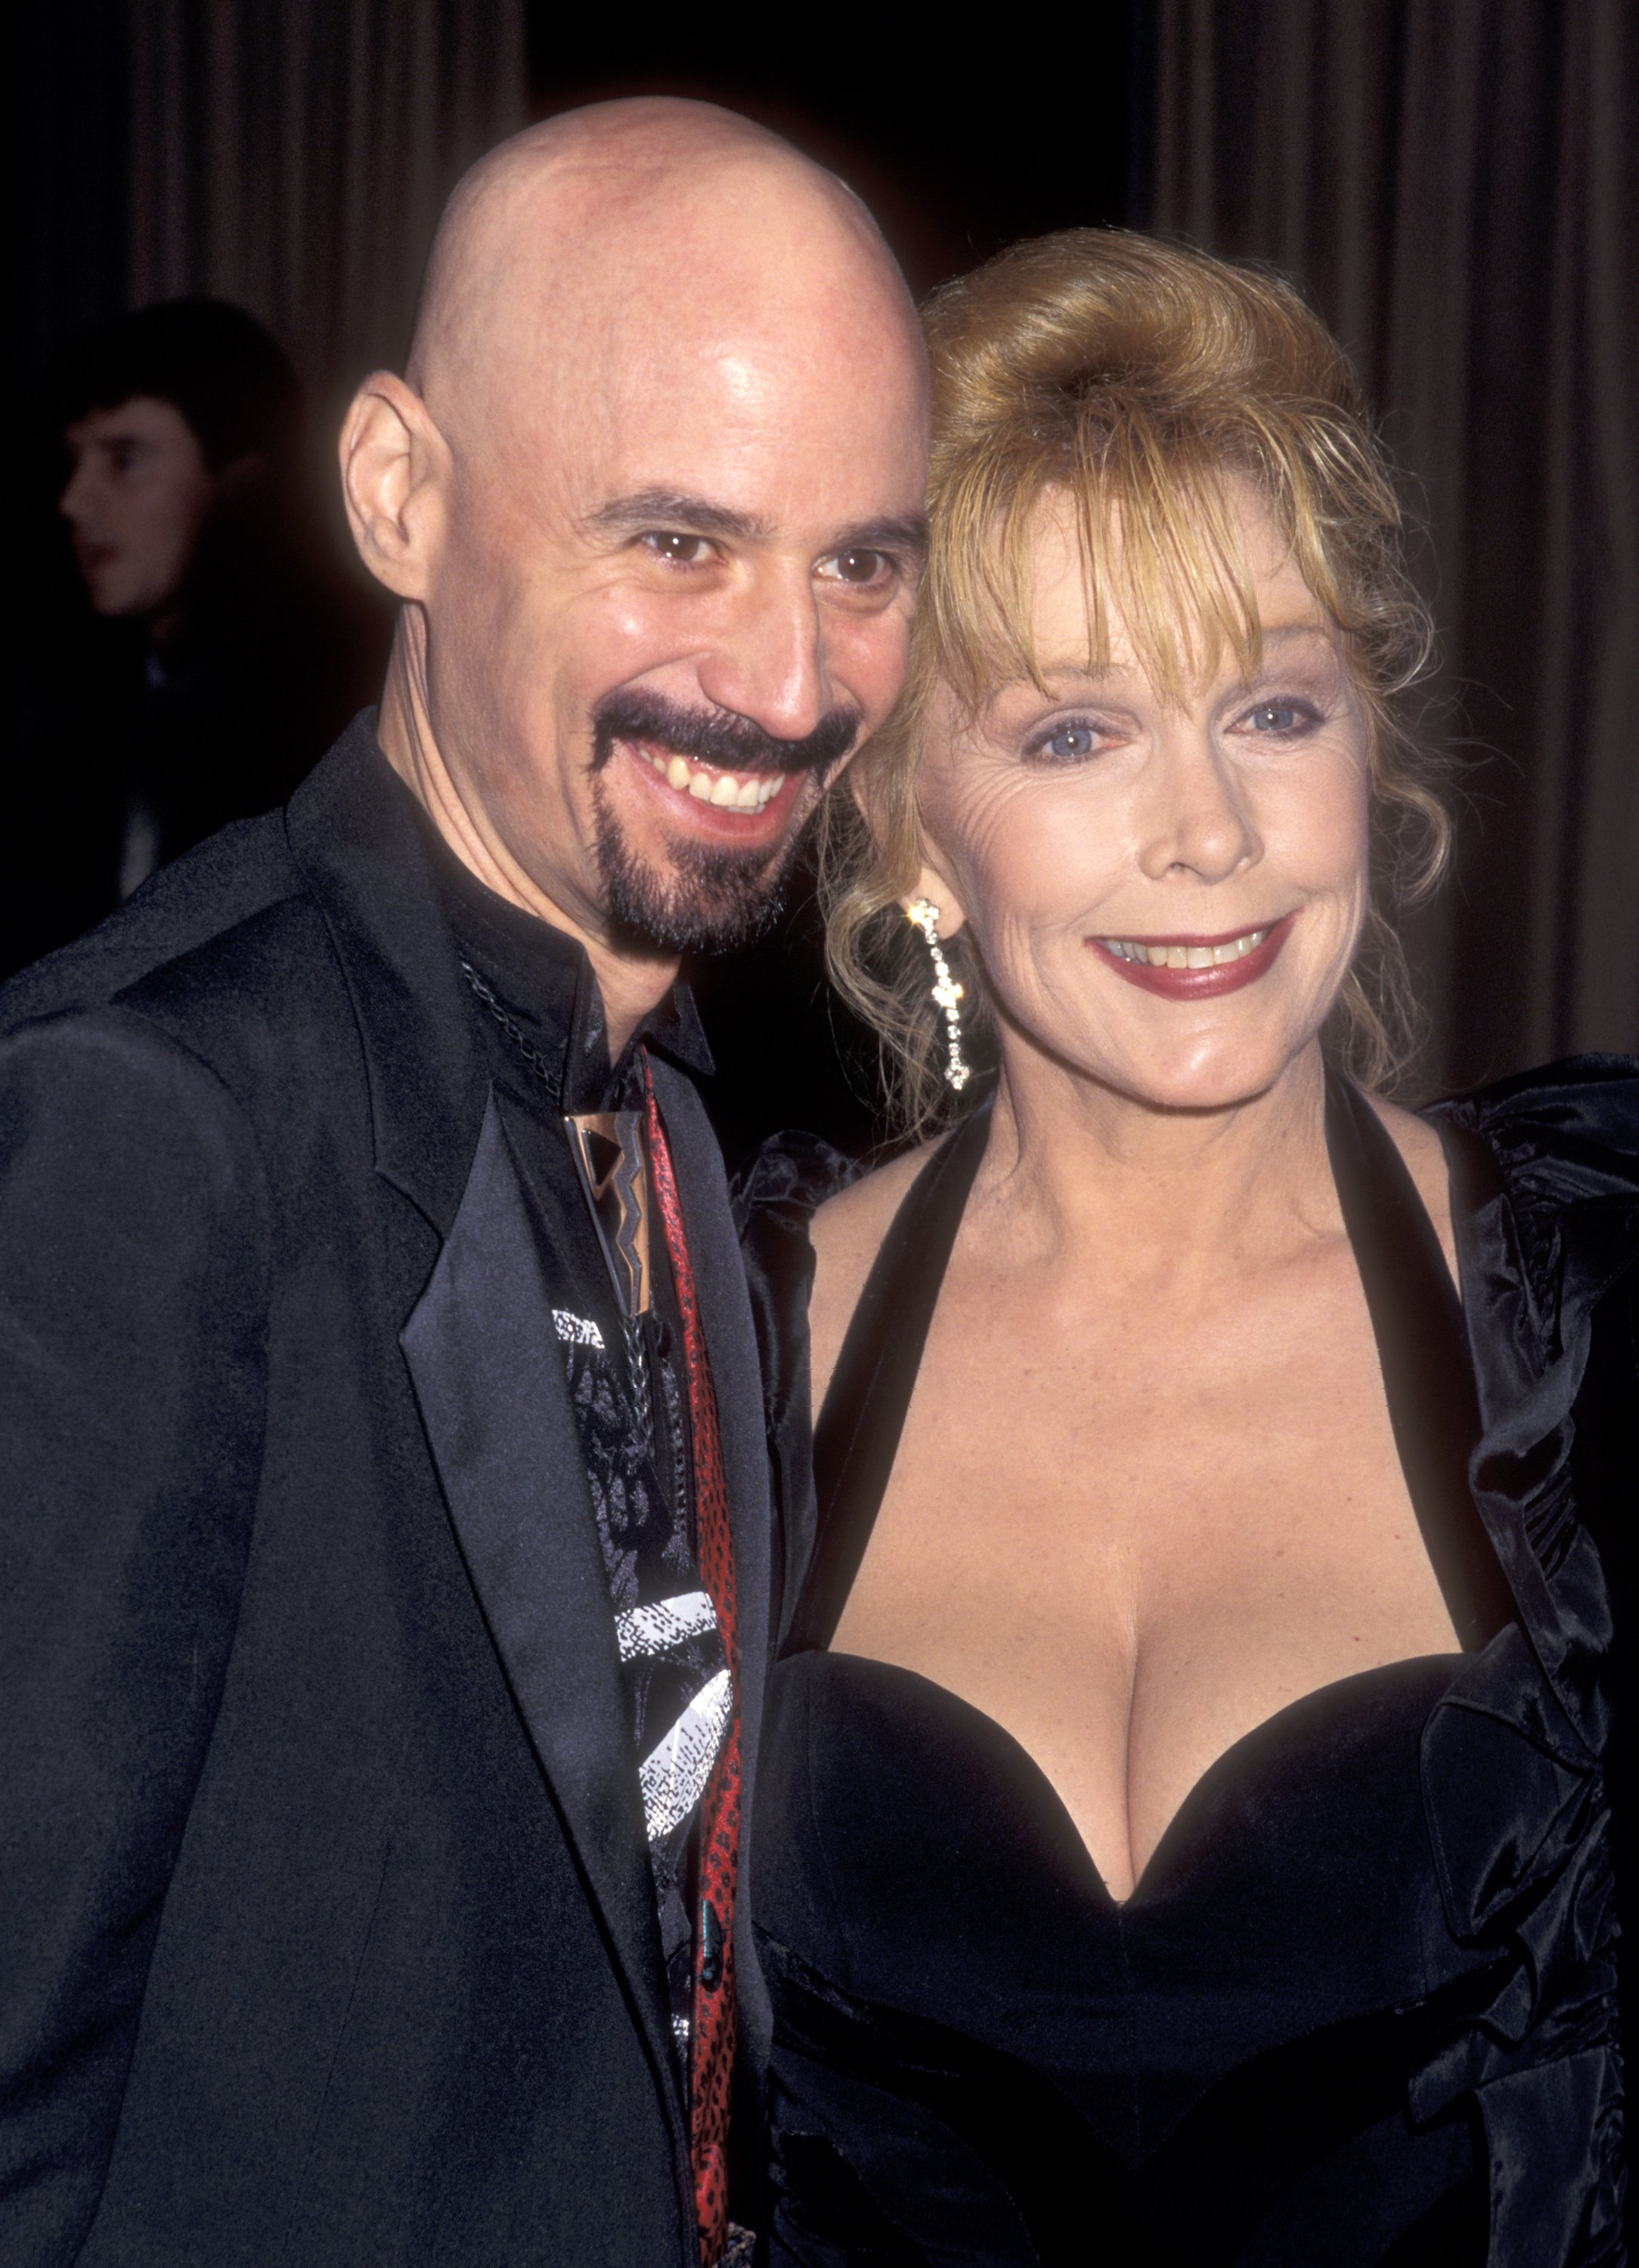 Bob Kulick and actress Stella Stevens on December 2, 1995 at New York Hilton Hotel in New York City, New York | Source: Getty Images